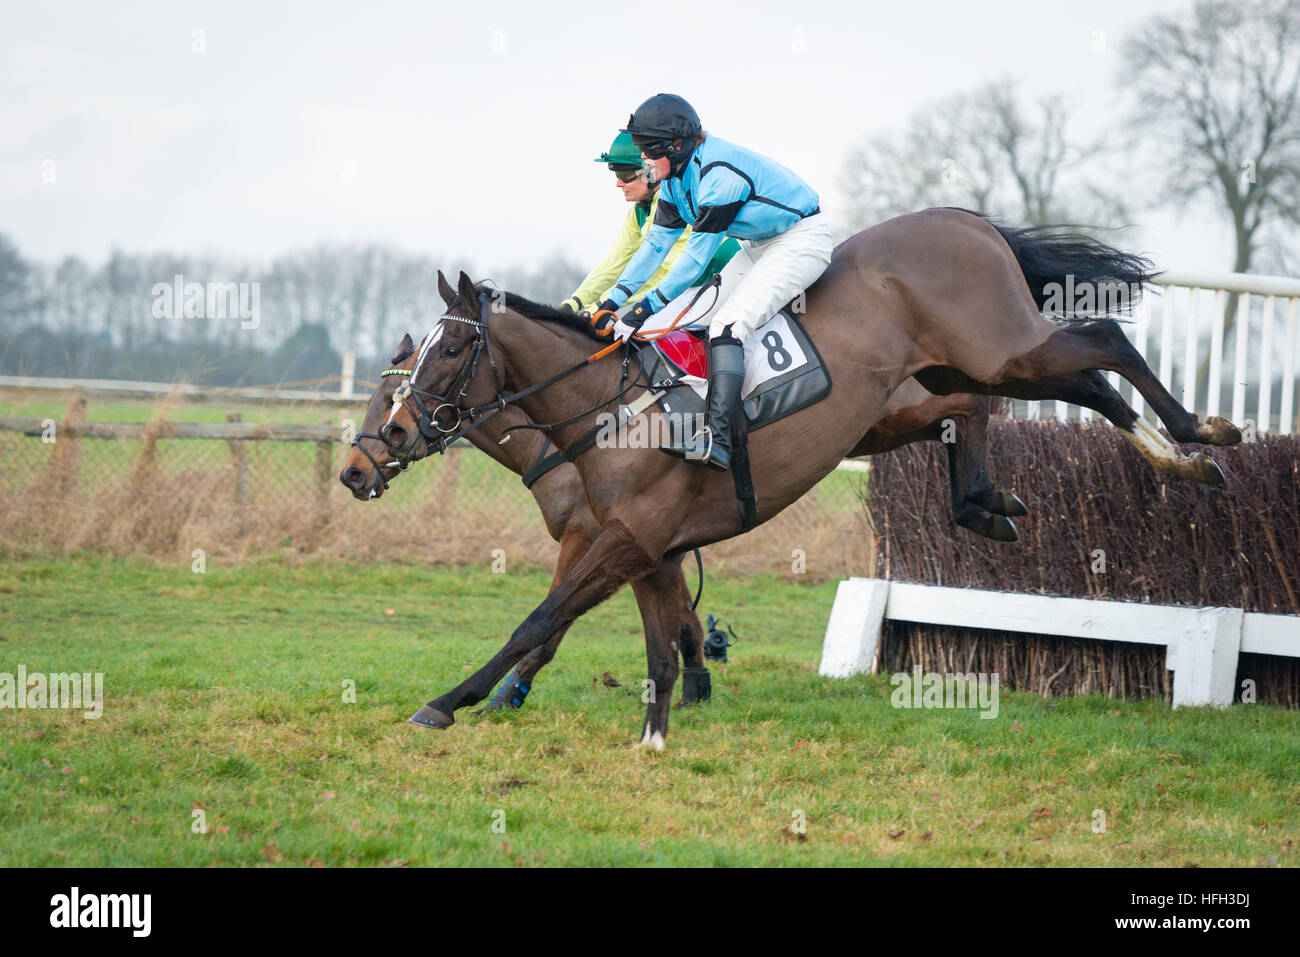 Cottenham Cambridgeshire UK 31st December 2016. Riders compete at the Cambridgeshire Harriers Hunt Club Point-to-Point race meeting. There were seven races at the New Year’s Eve horse racing meeting. Credit Julian Eales/Alamy Live News Stock Photo